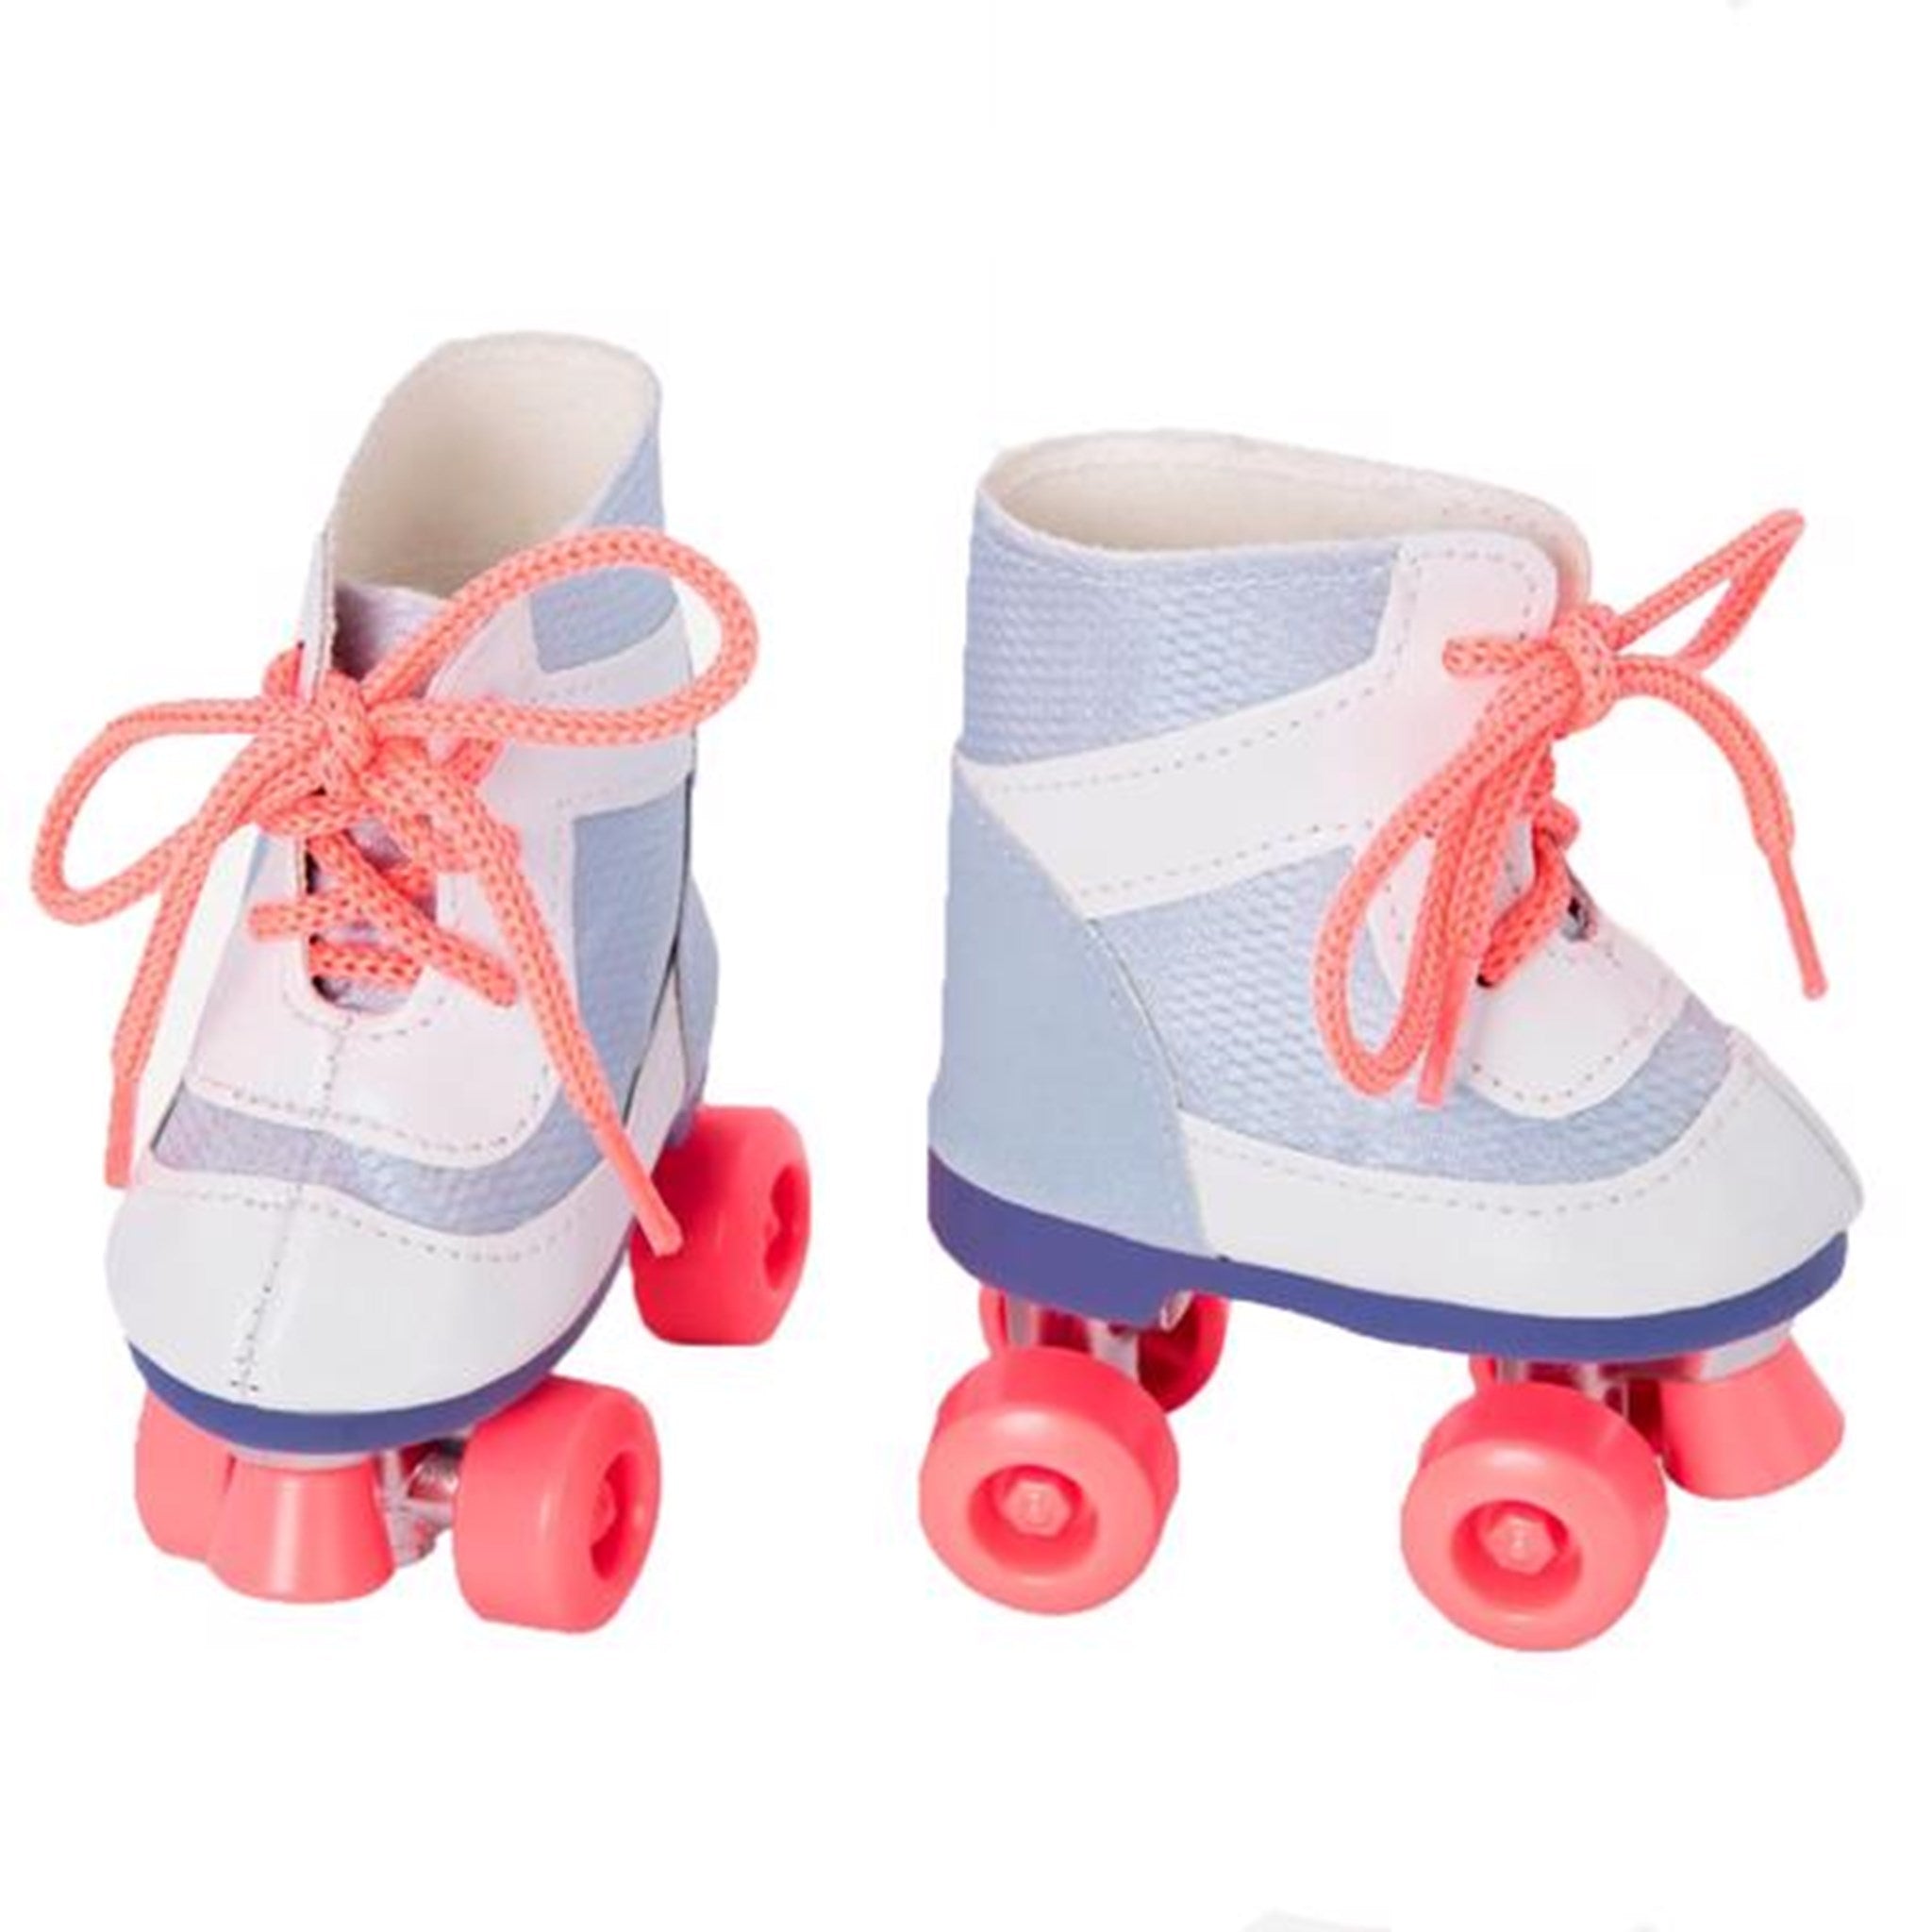 Our Generation Doll Shoes - Rollerskates Blue